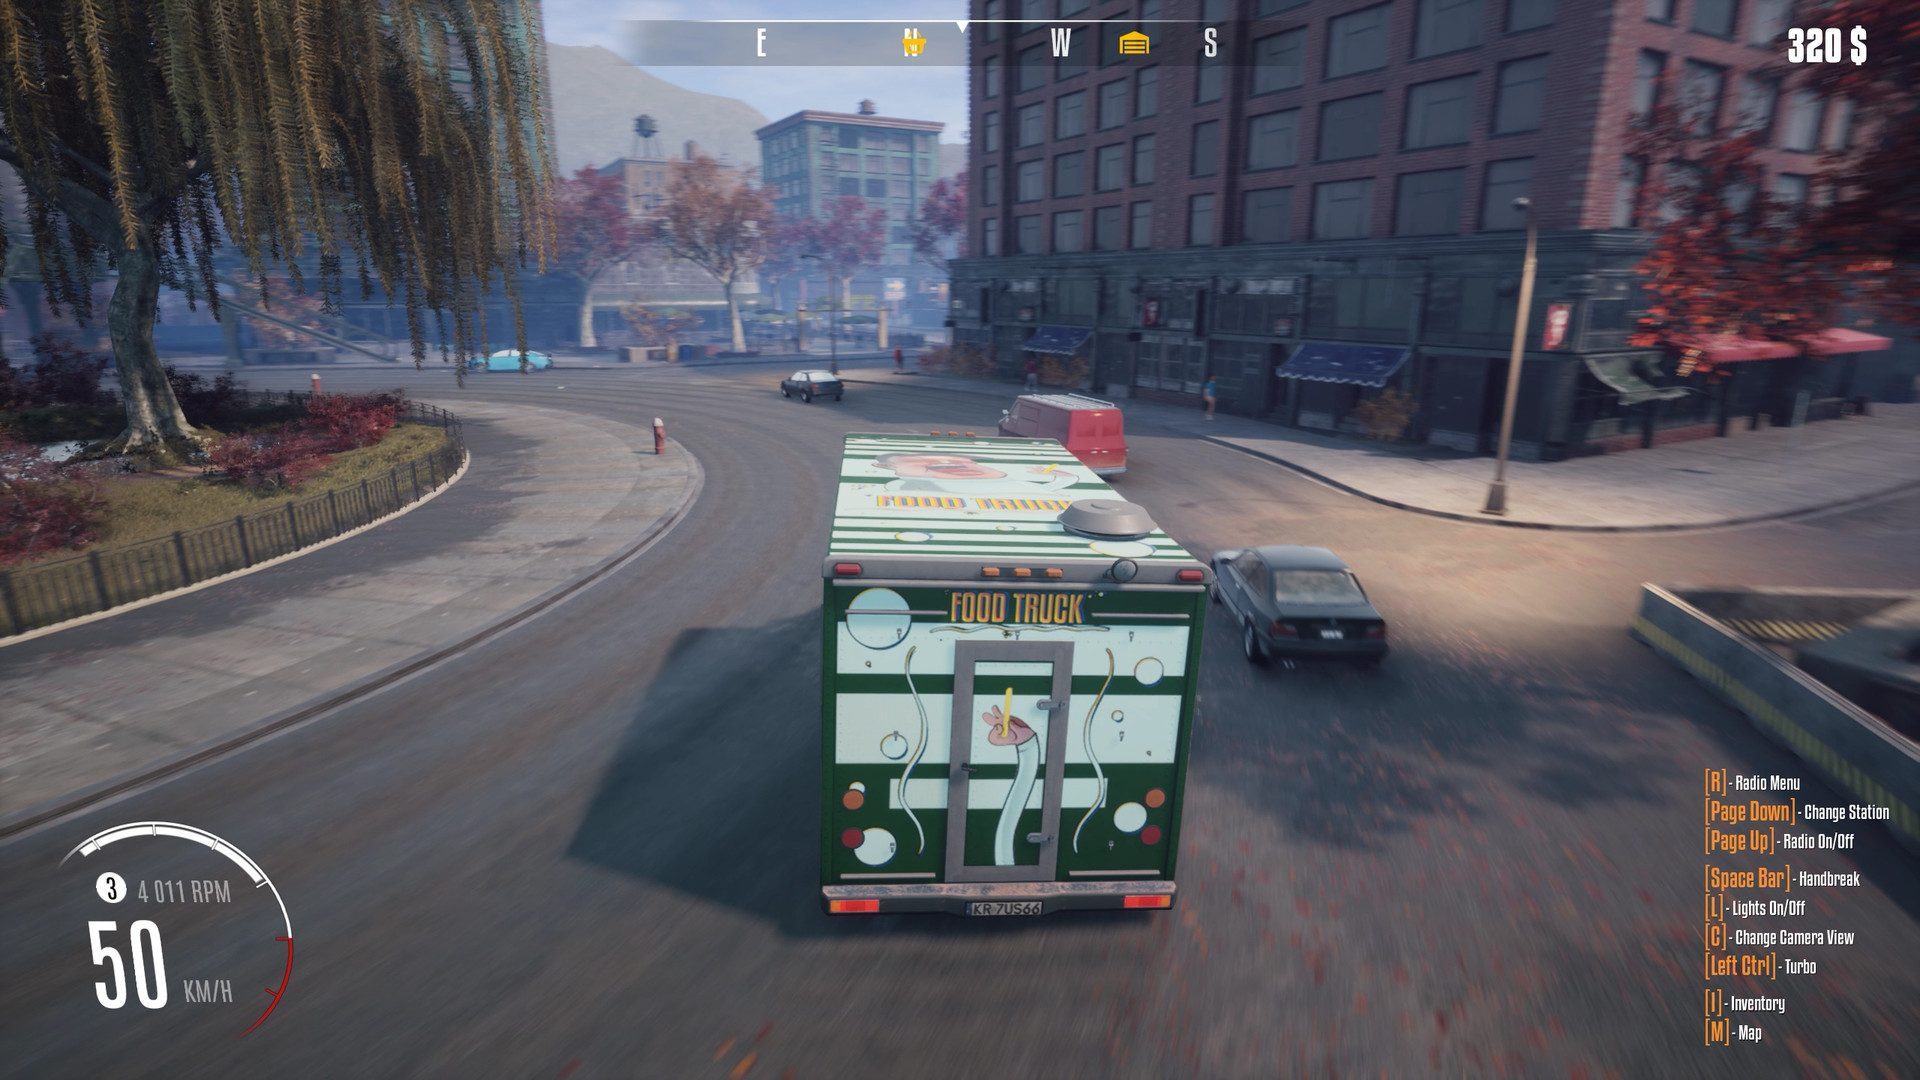 Food Truck Simulator is getting a playable demo